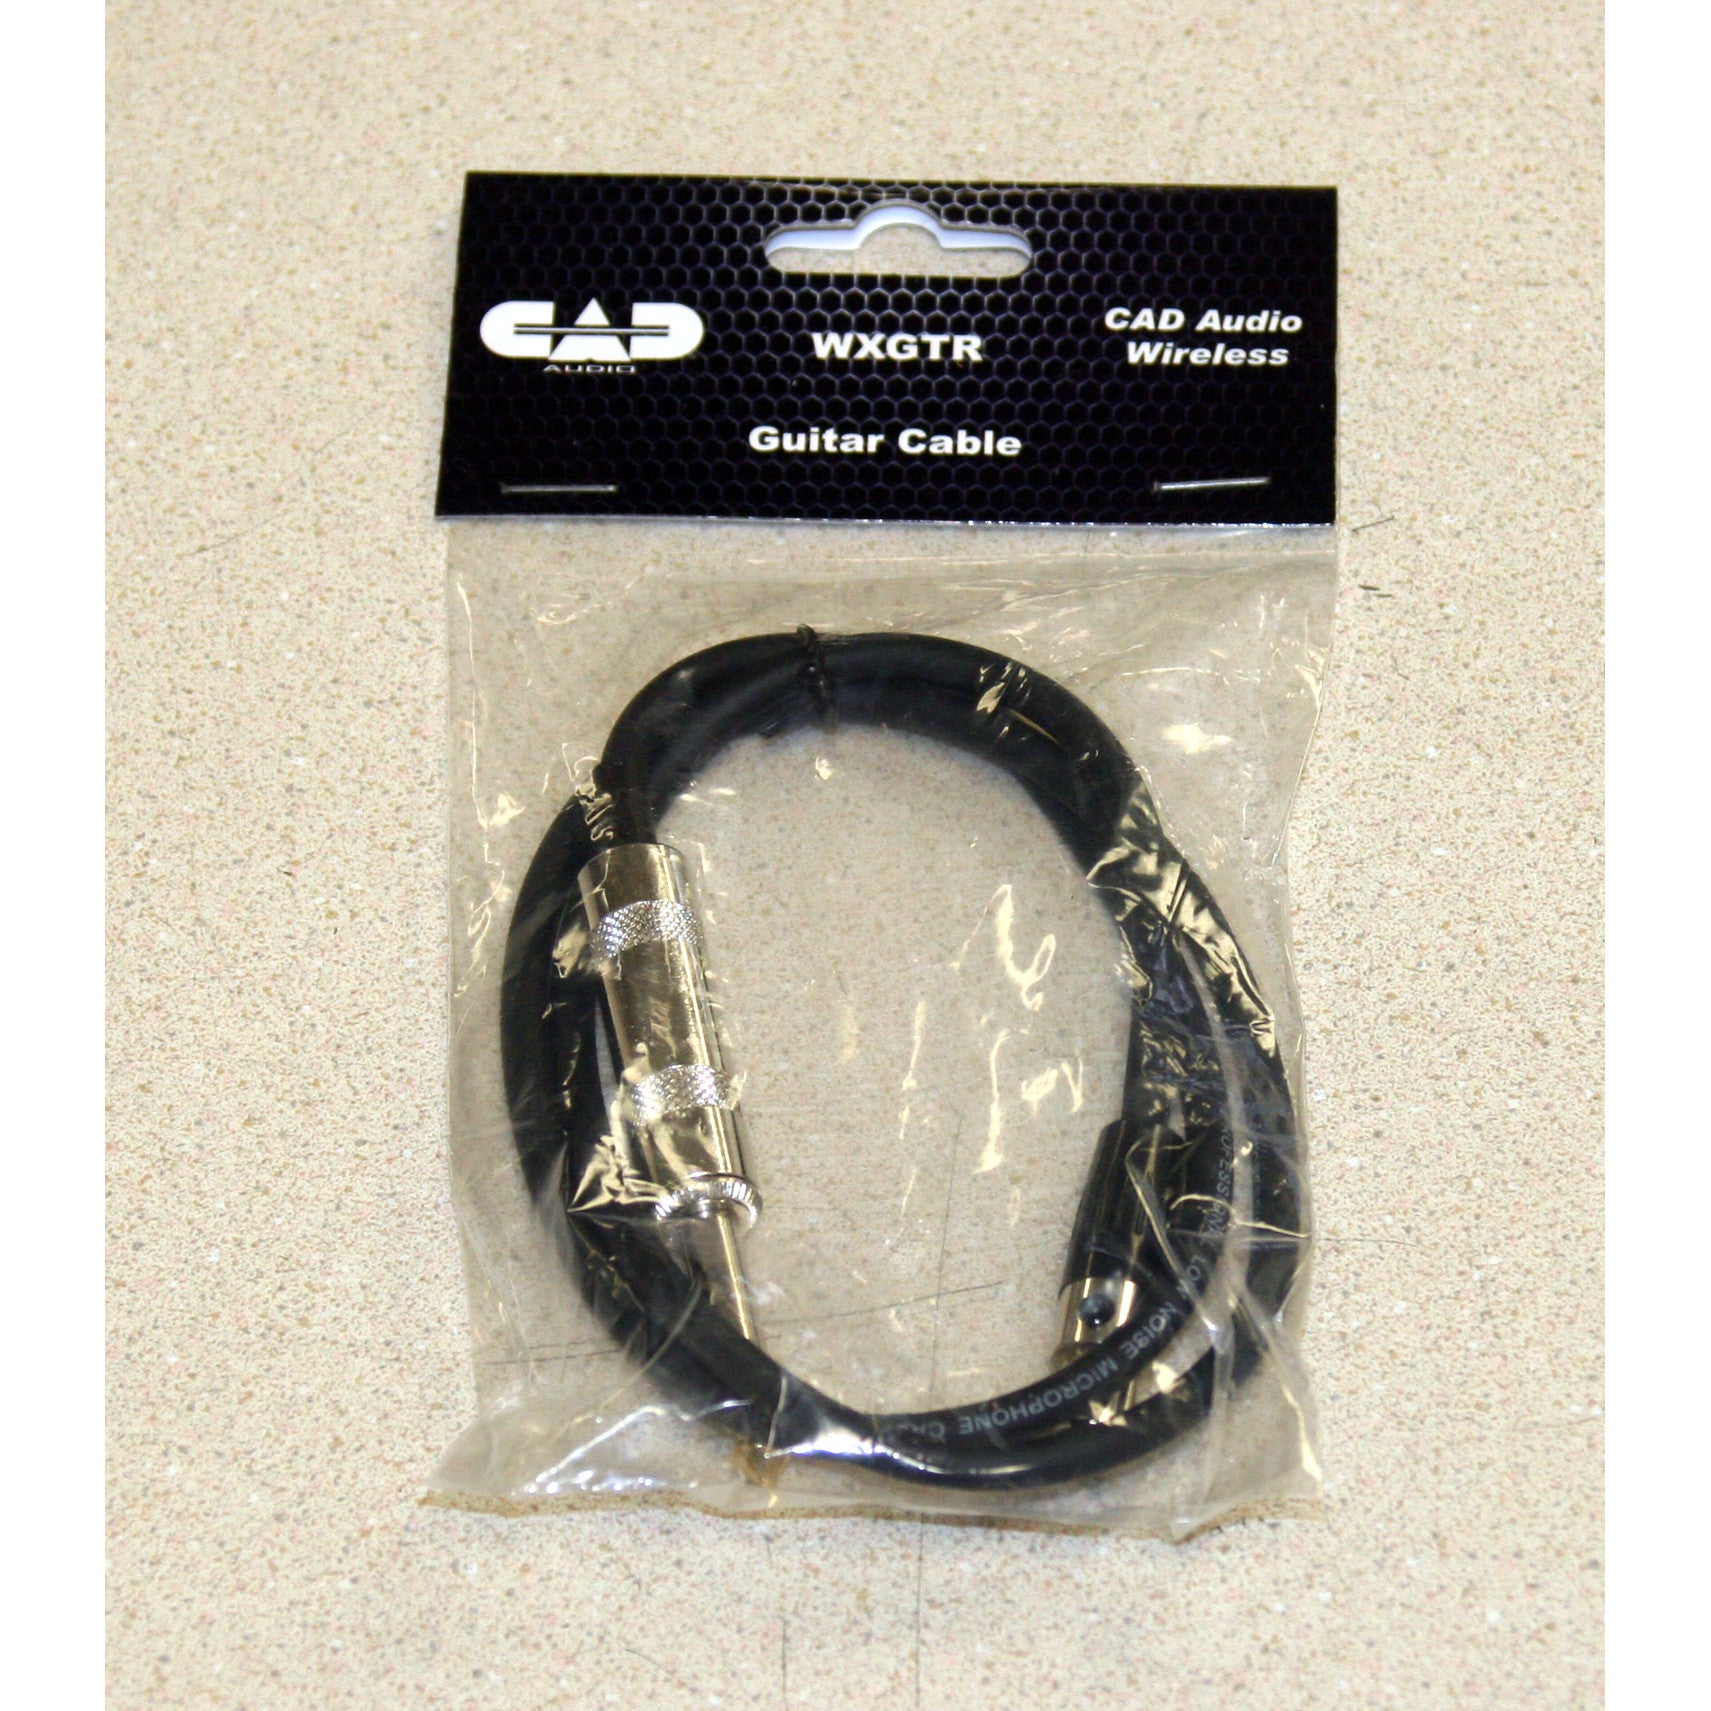 CAD Guitar Cable for Wireless Body Packs